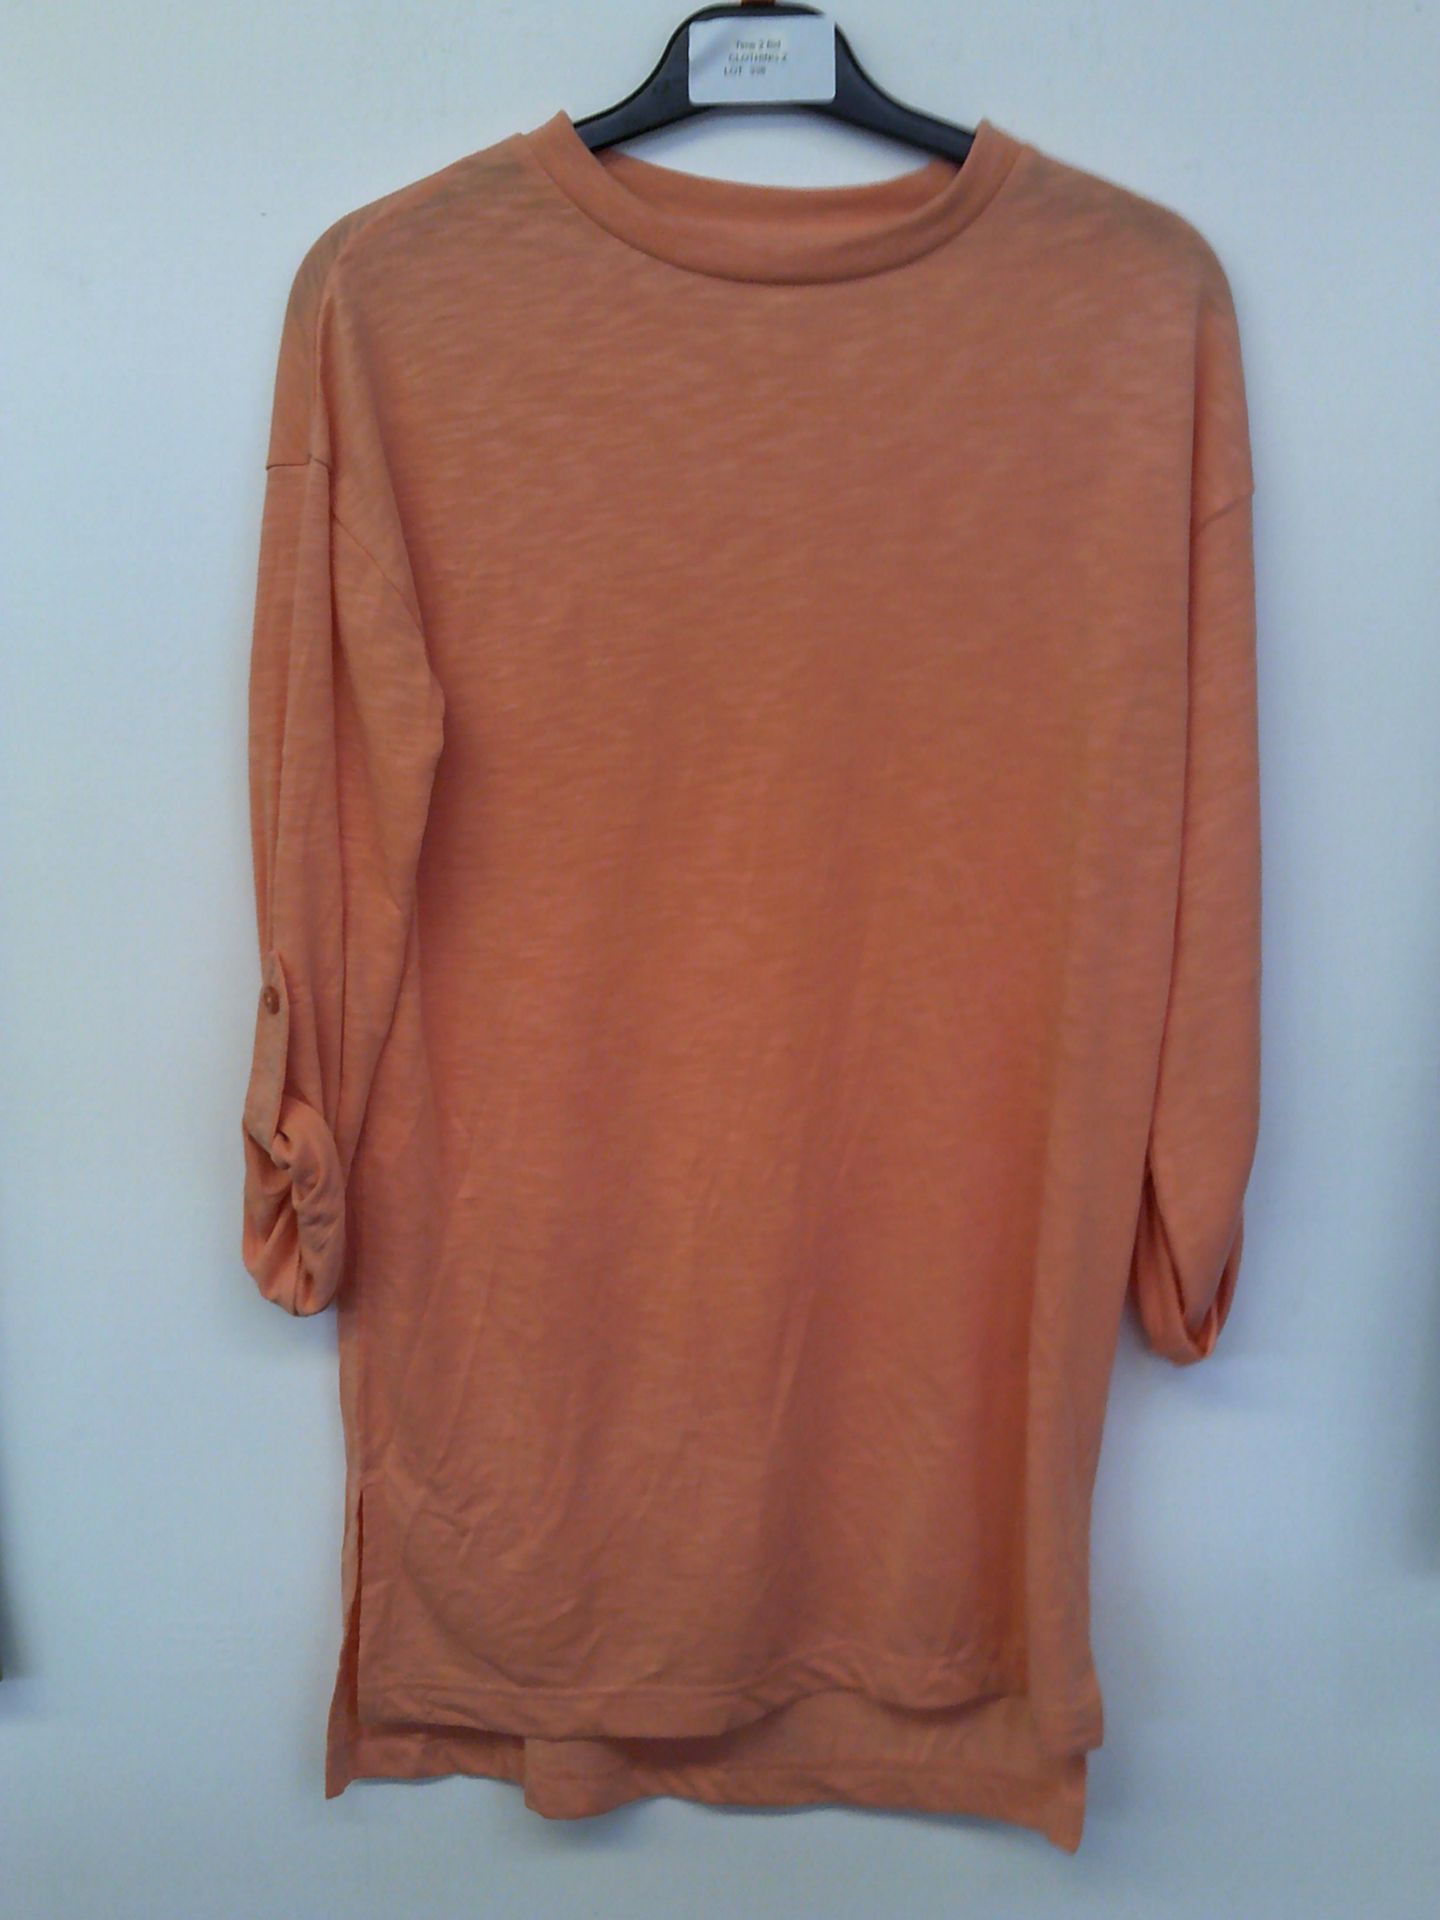 ROLL UP SLEEVES TOP SIZE 10